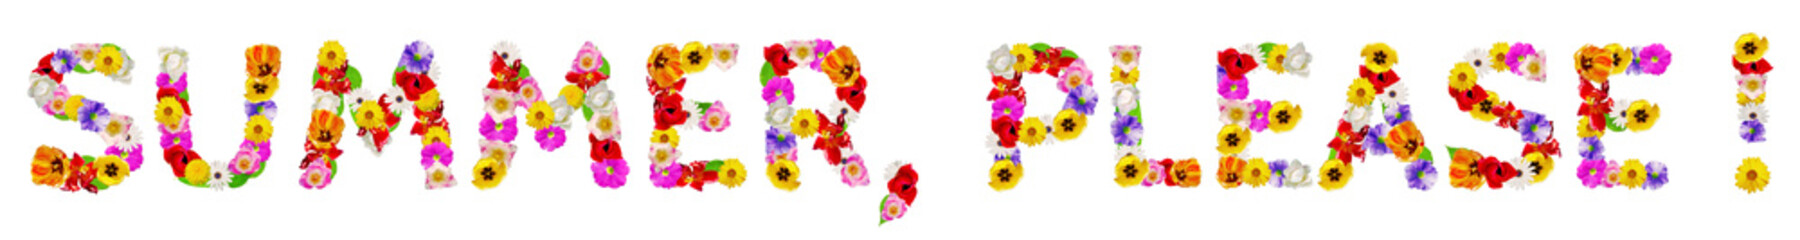 Text 'Summer, please!' made of flower photographs on white background - banner format - high...